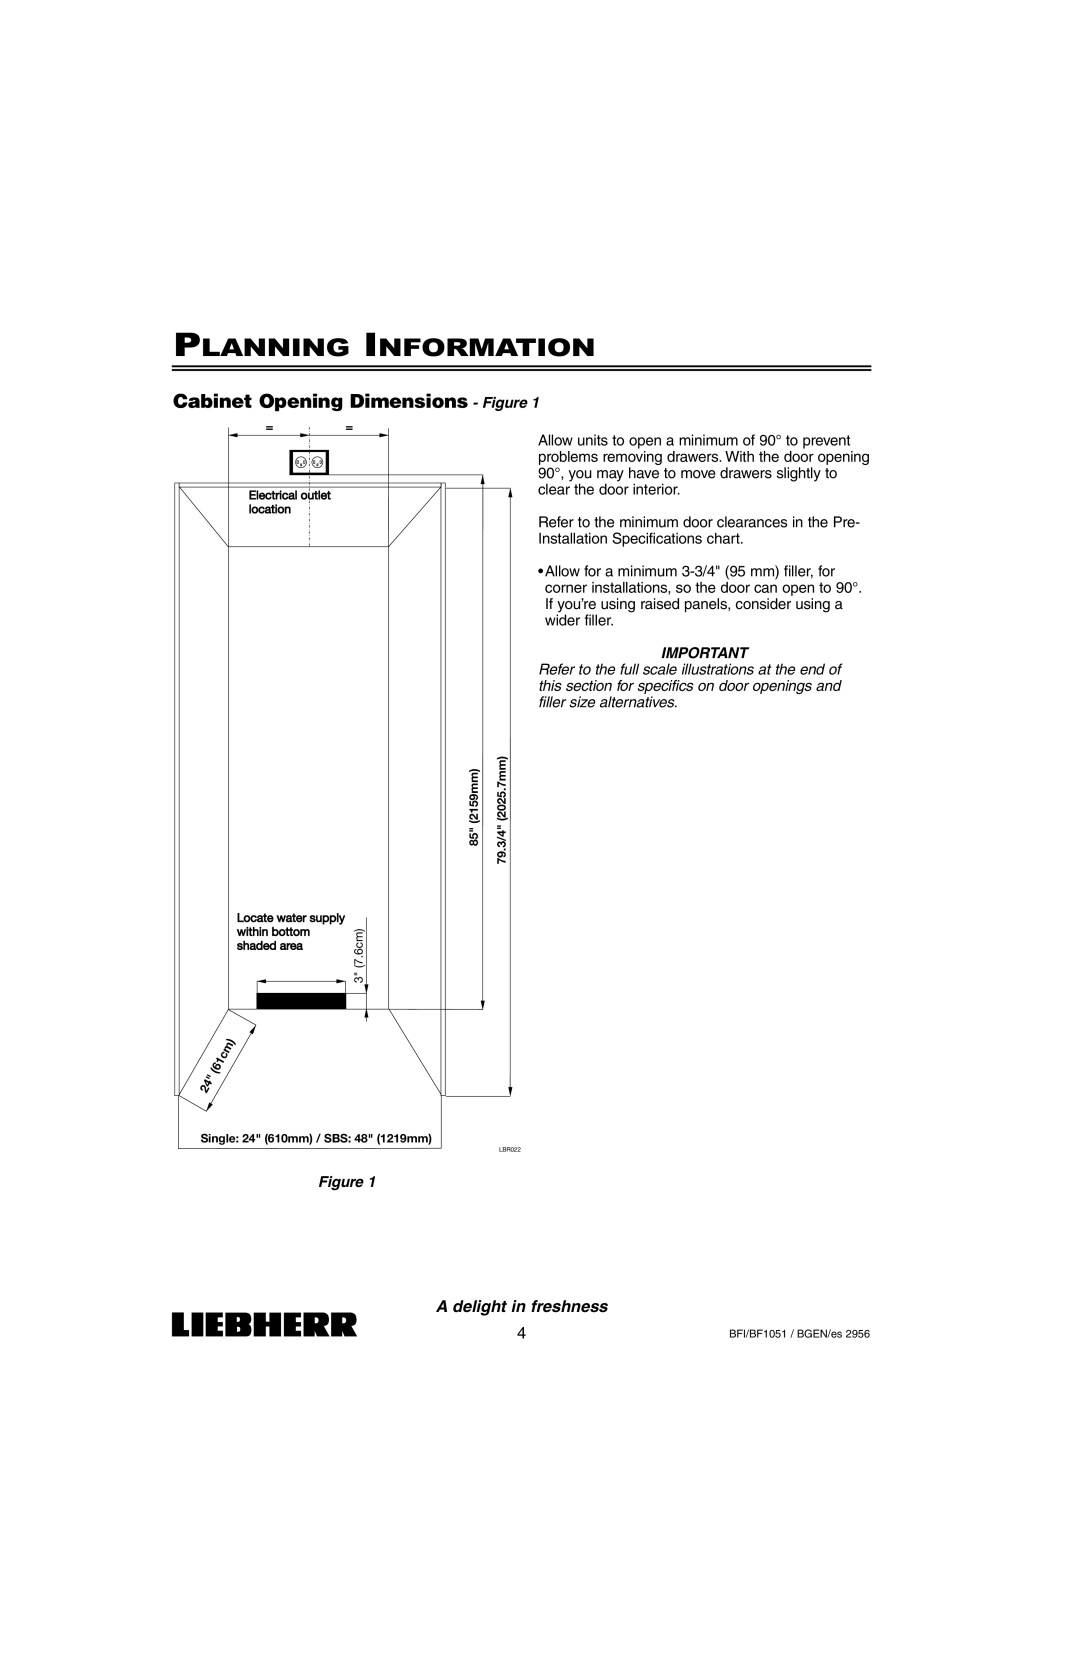 Liebherr BFI1051, BF1051 Planning Information, Cabinet Opening Dimensions - Figure, A delight in freshness 